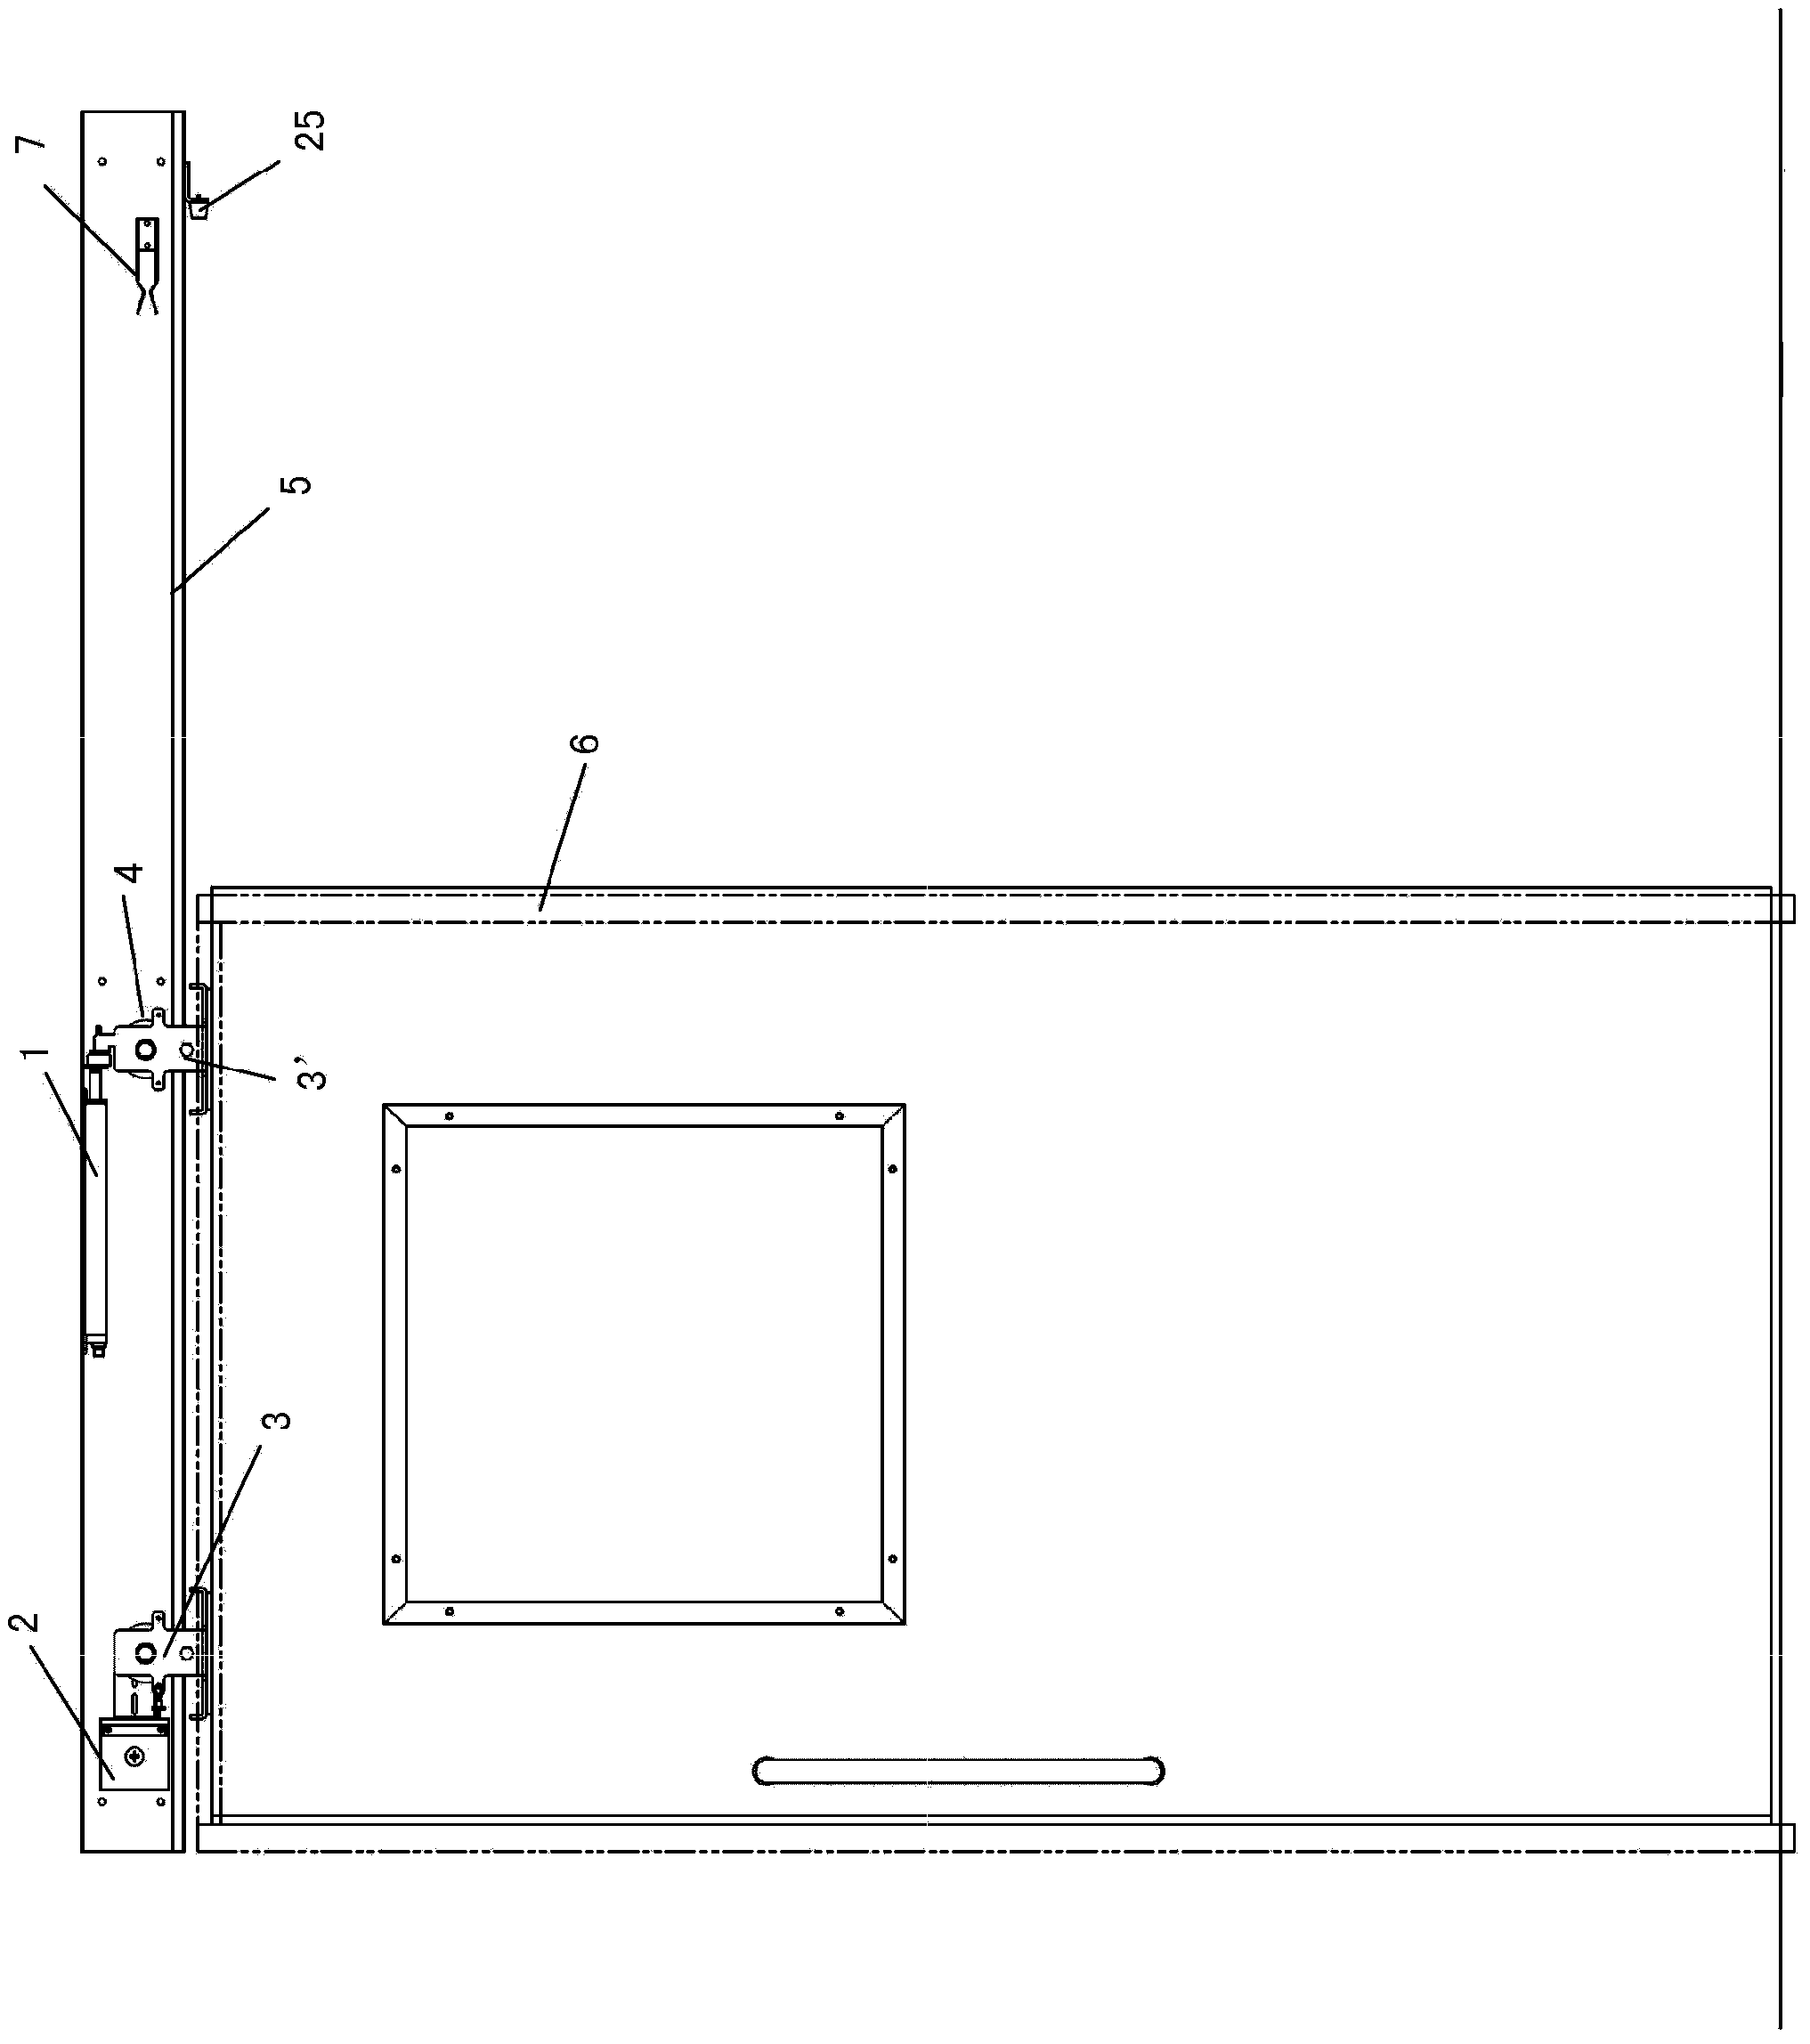 Sliding door pulling and buffering device